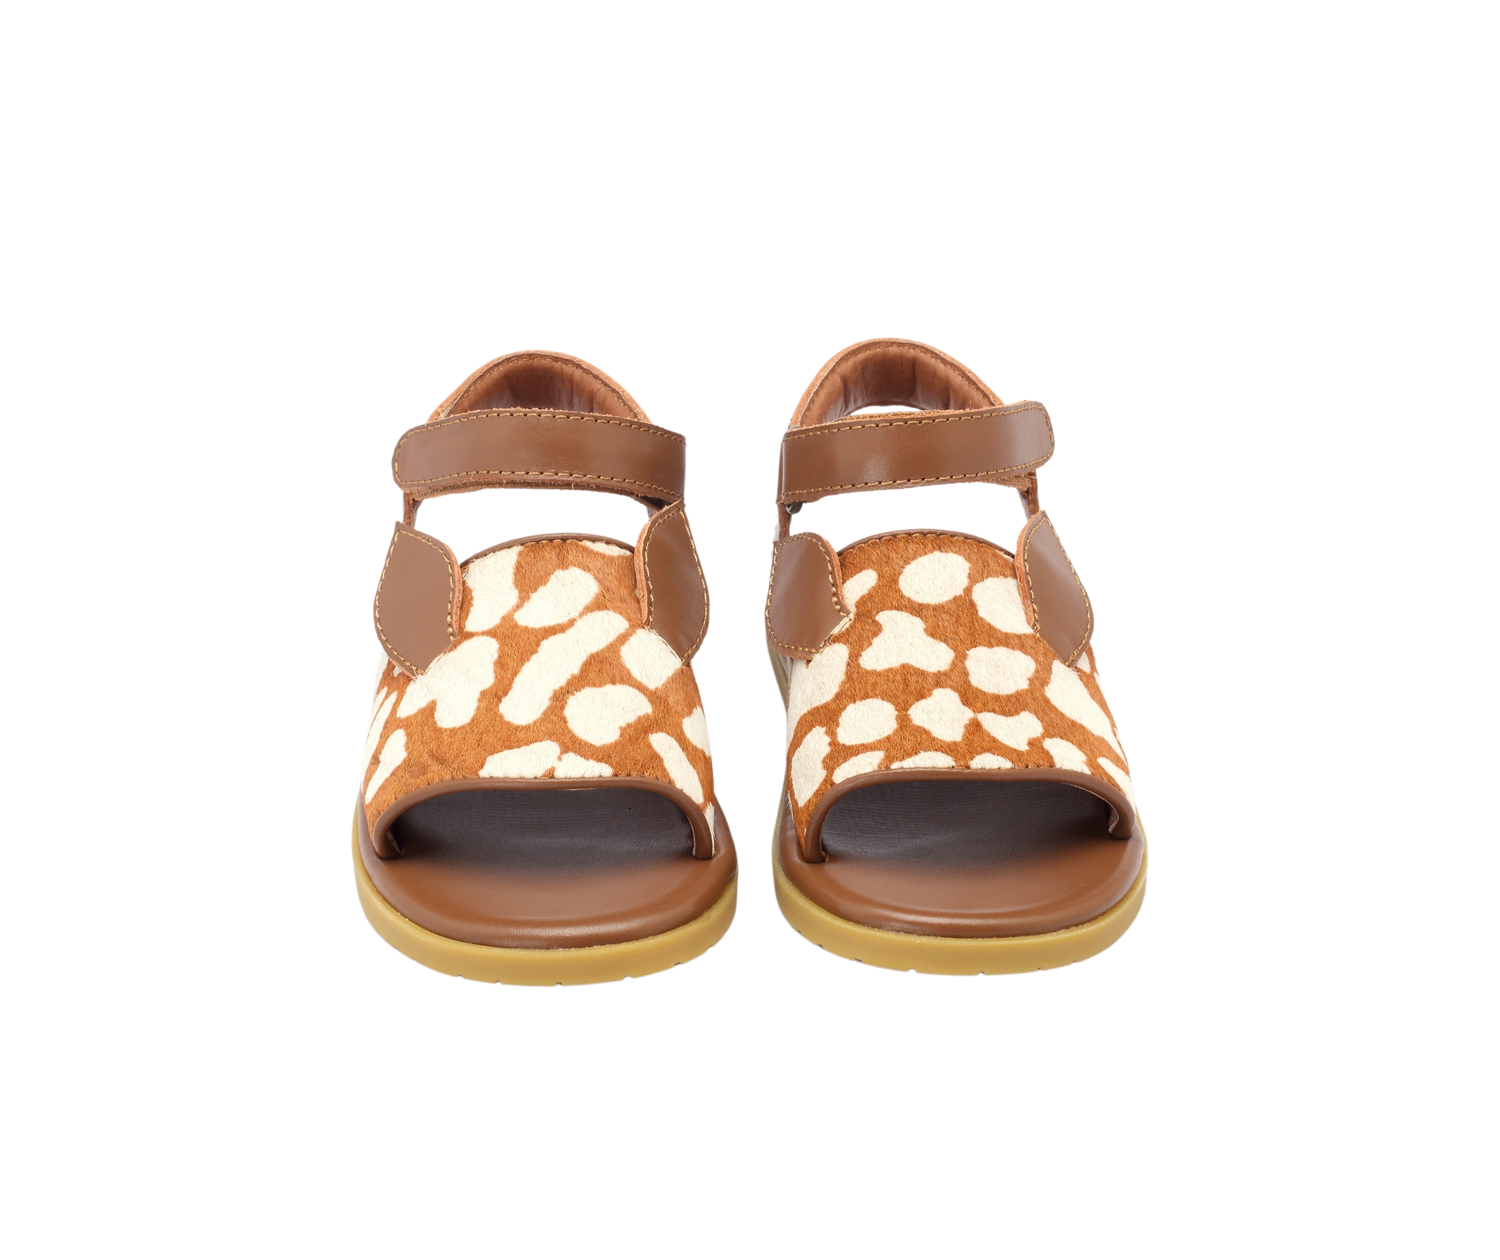 Lara Sandals | Bambi | Brown Spotted Cow Hair